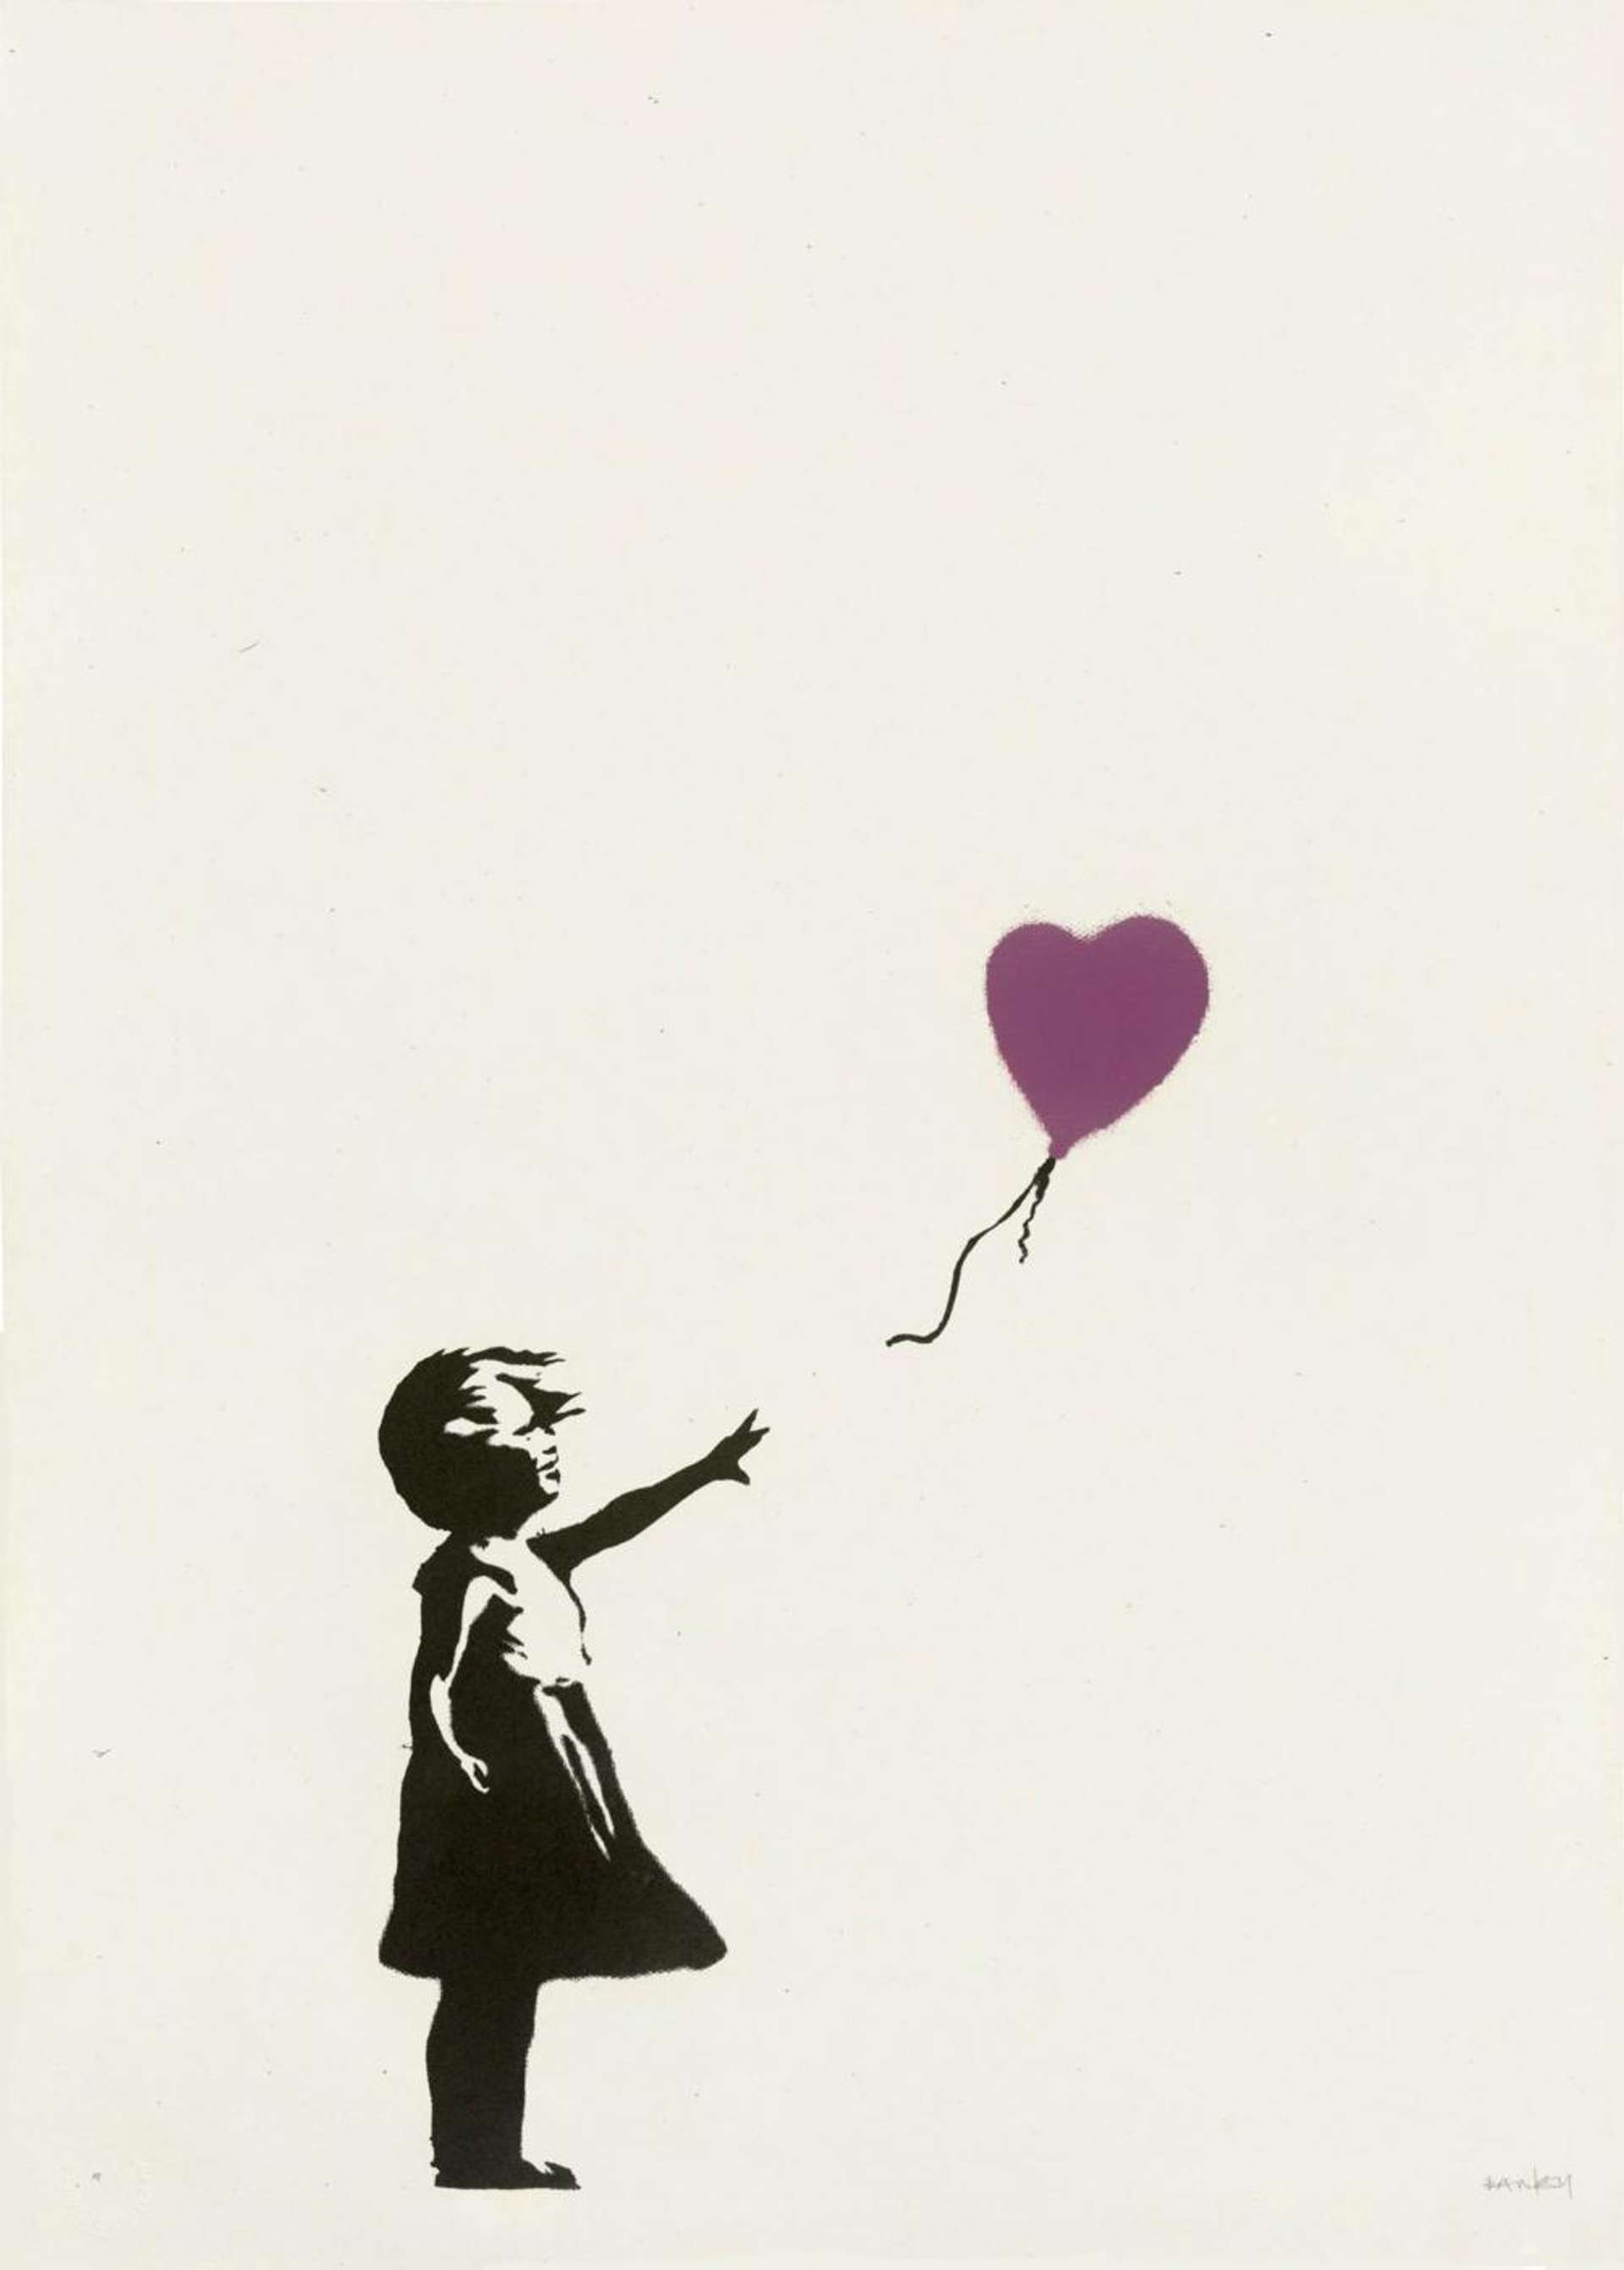 A screenprint by Banksy depicting a young girl in black paint reaching for a purple heart-shaped balloon